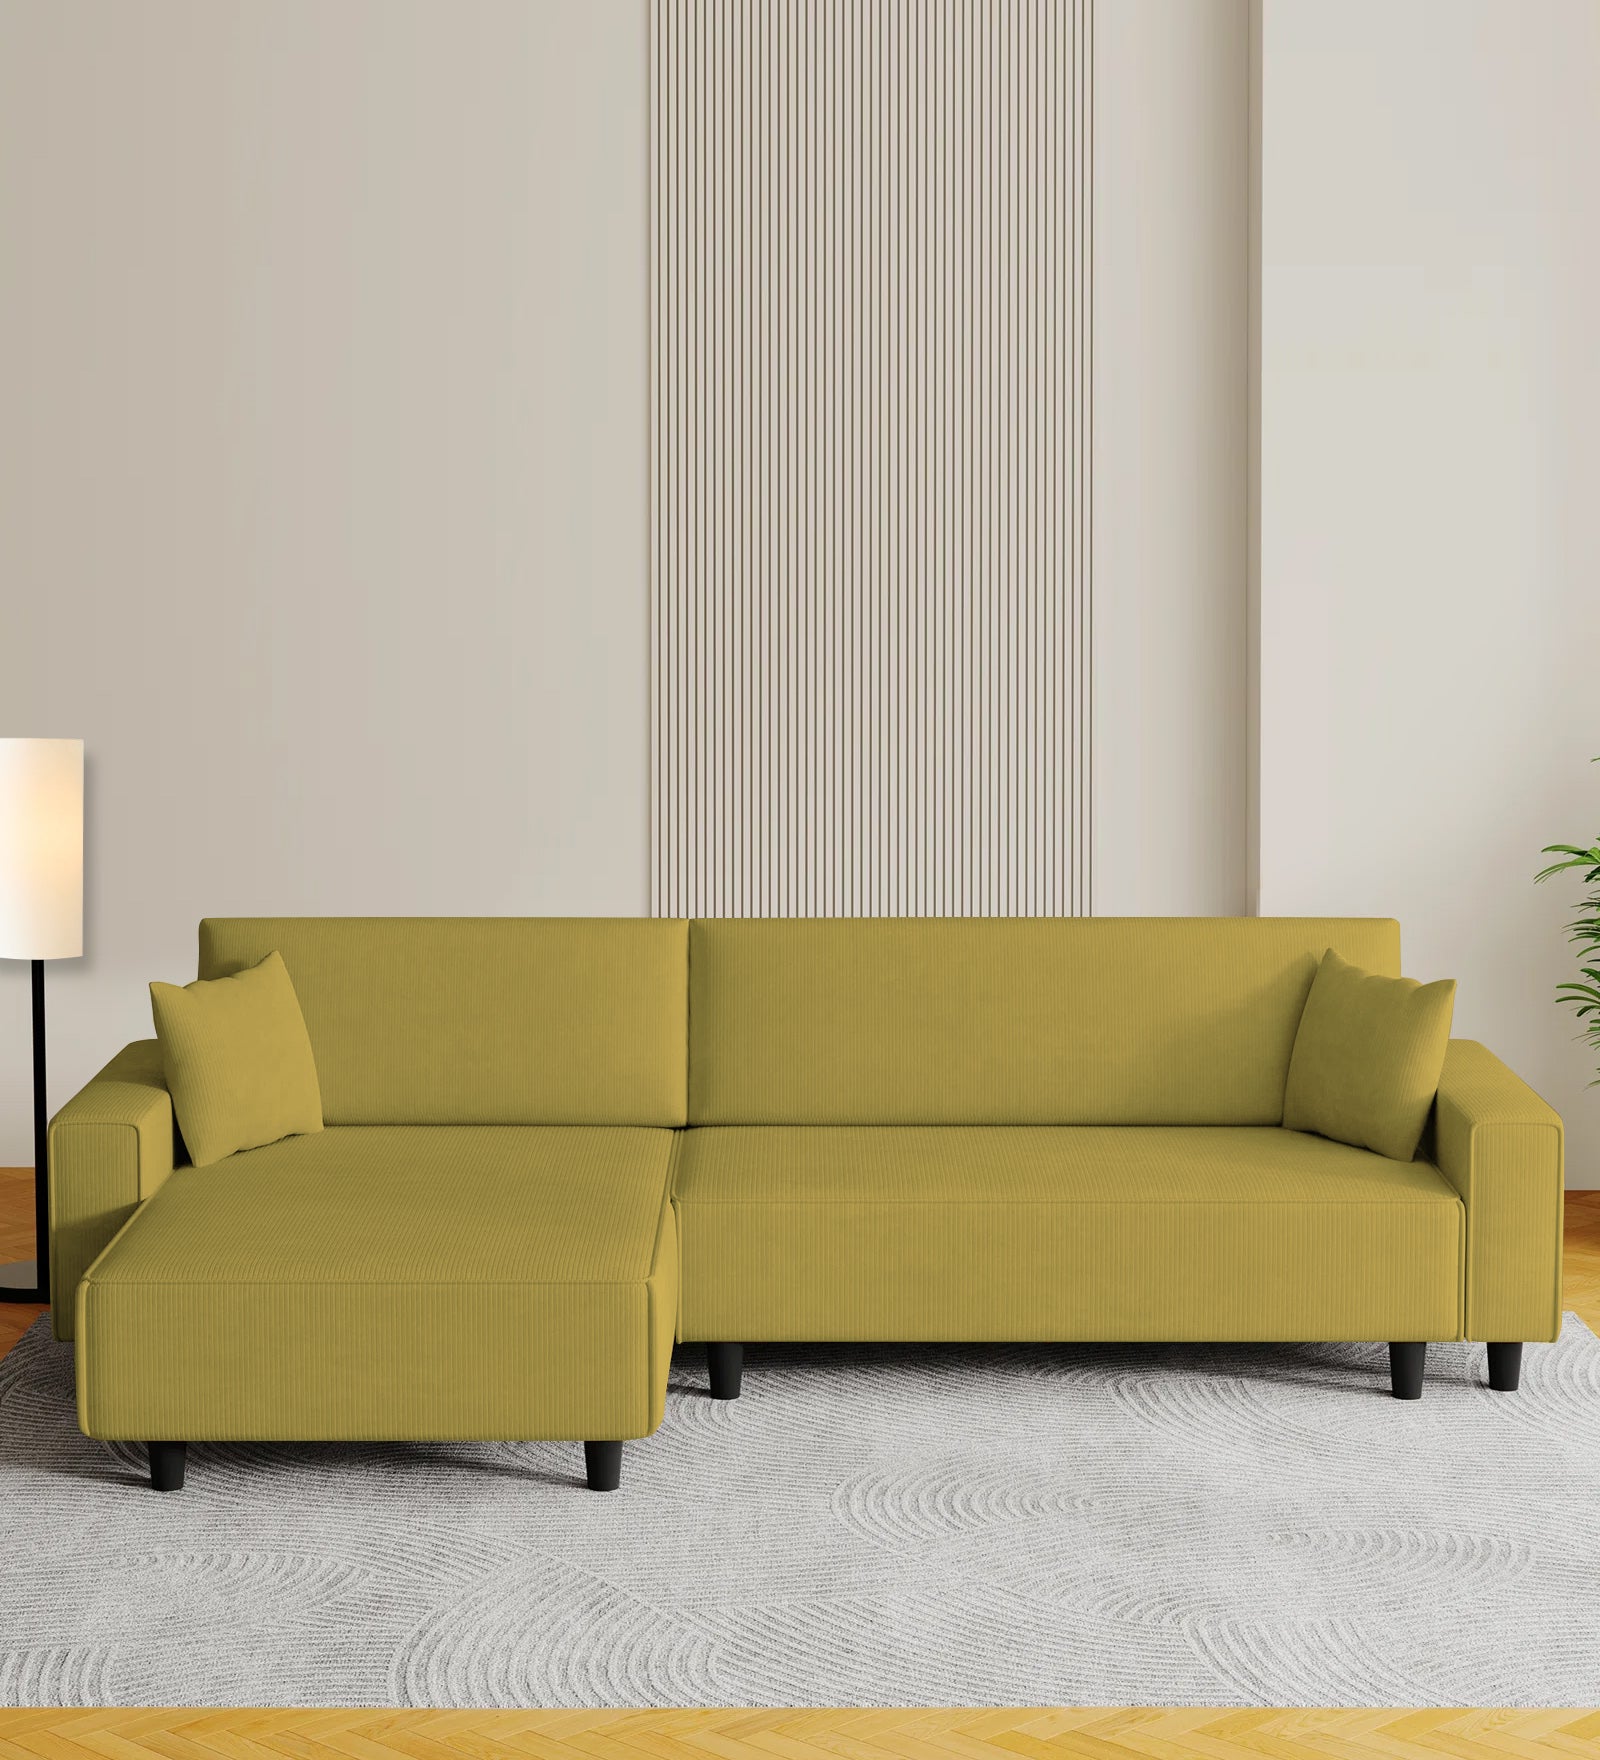 Peach Fabric RHS 6 Seater Sectional Sofa Cum Bed With Storage In Parrot Green Colour